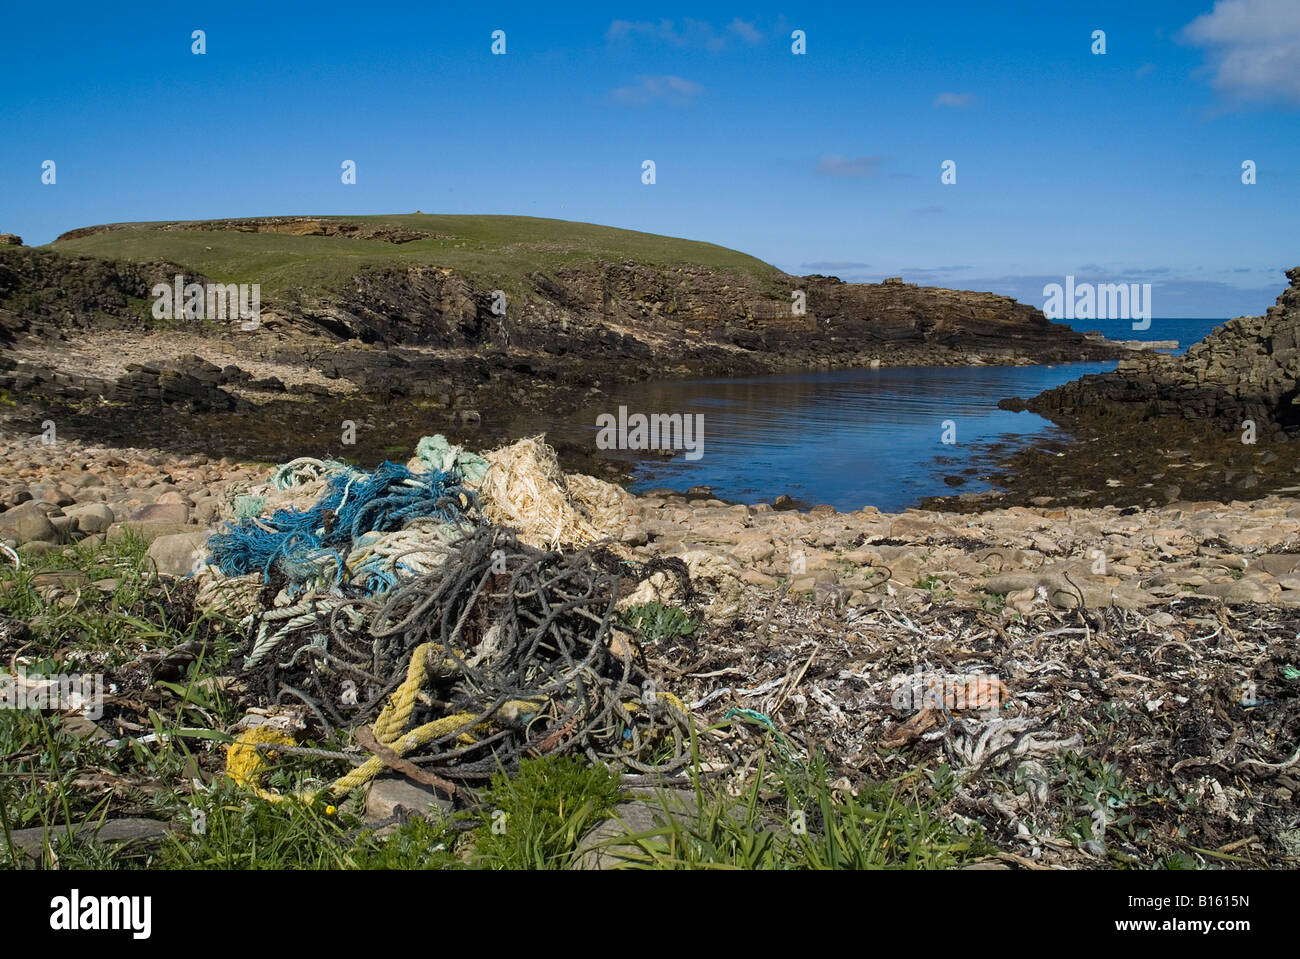 dh  FLOTSAM UK Fishing ropes and nets refuse washed up ashore from Atlantic Scotland orkney yesnaby coast debris beach litter rubbish sea garbage Stock Photo